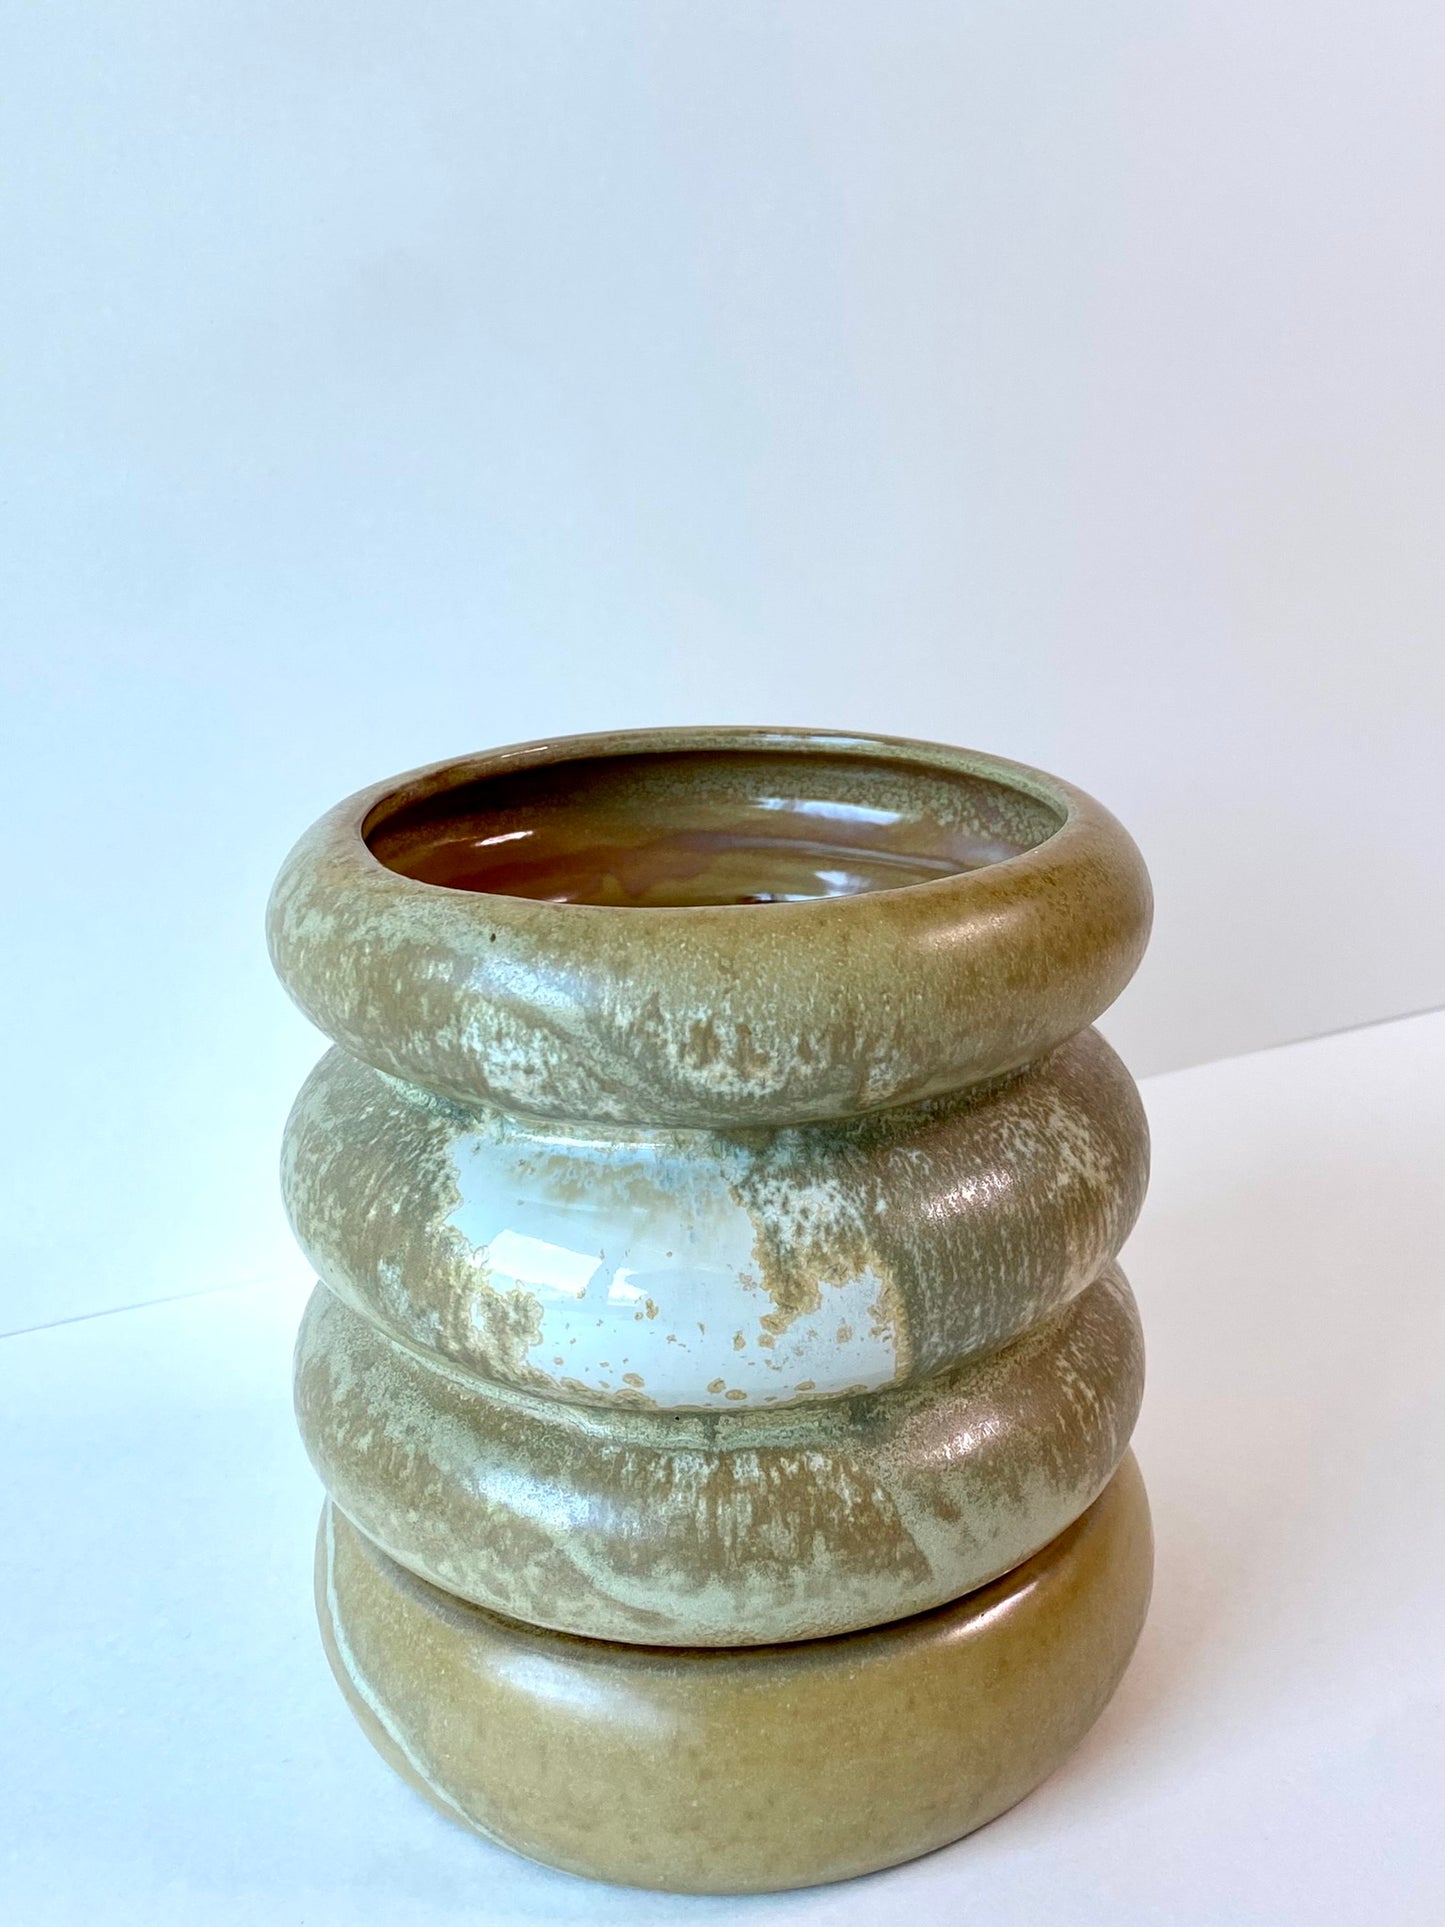 ringed planter with saucer